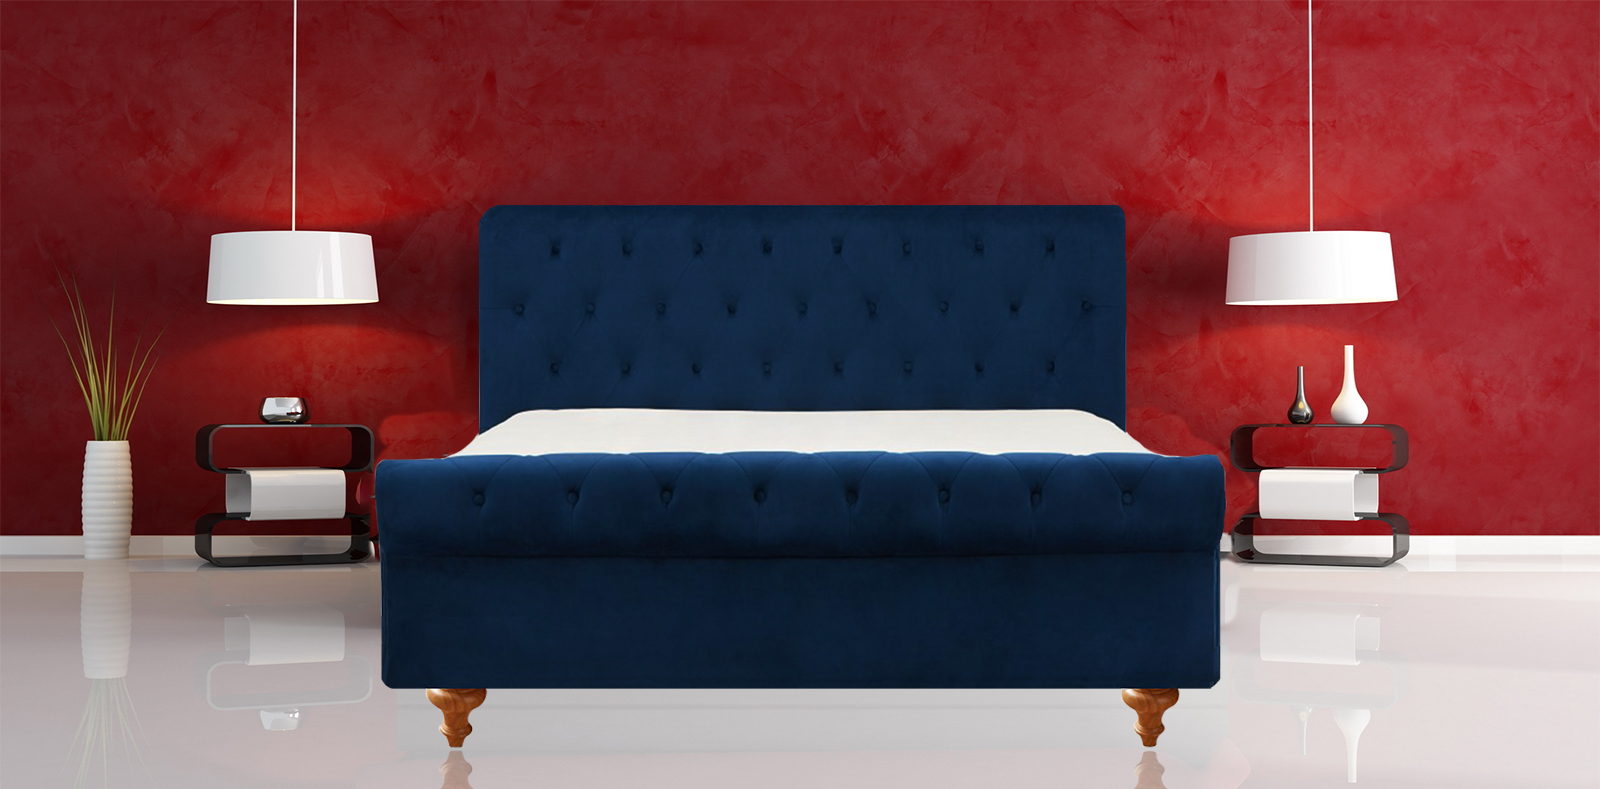 Buy King size Bed in Navy Blue Colour Mordern Look With Flat 50% Off